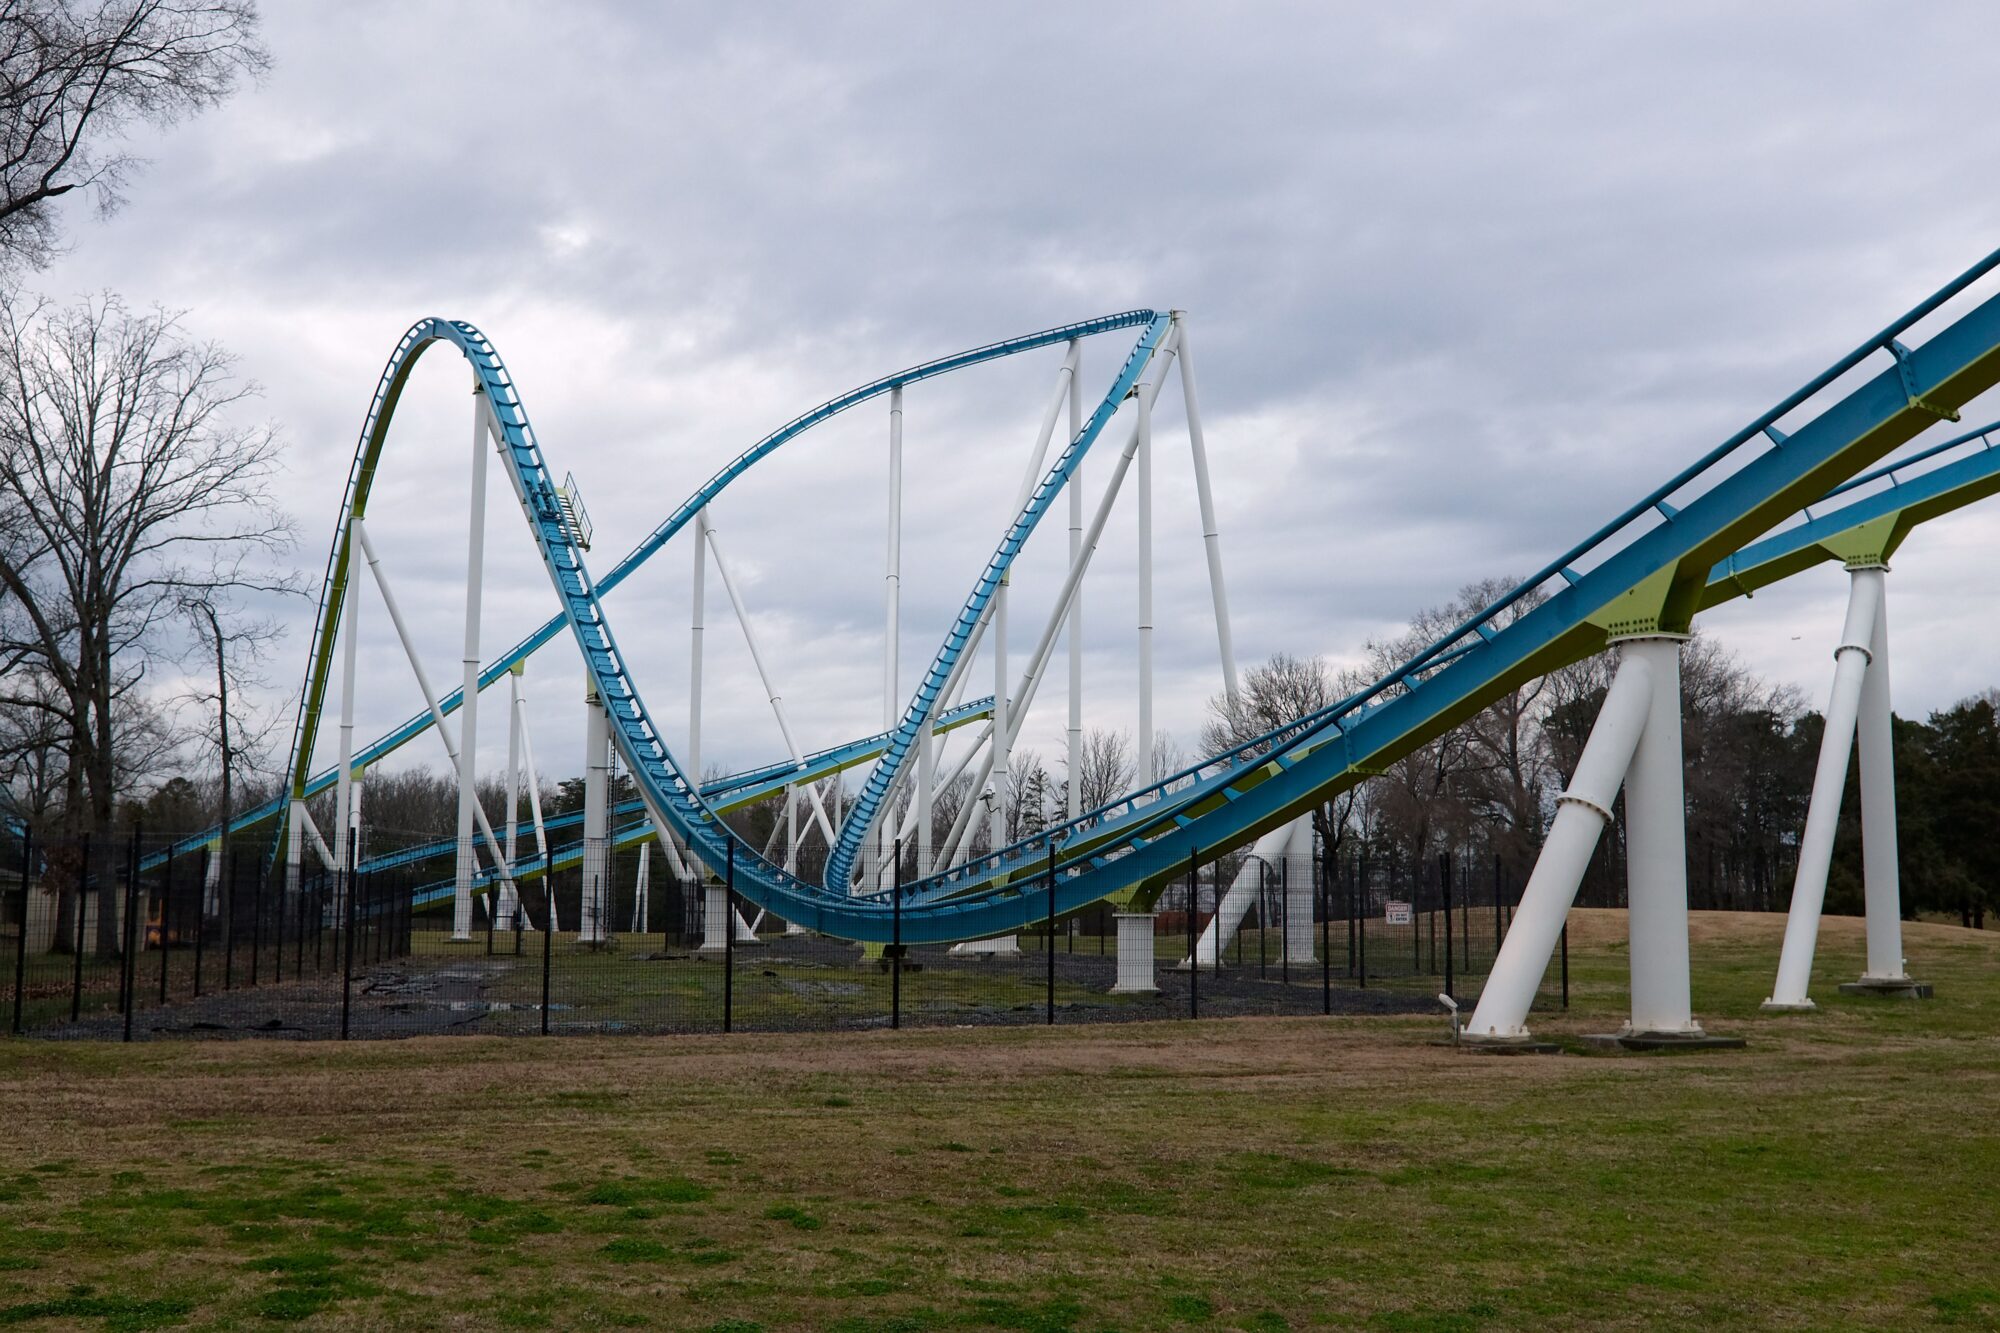 A portion of the track of Fury 325 rollercoaster